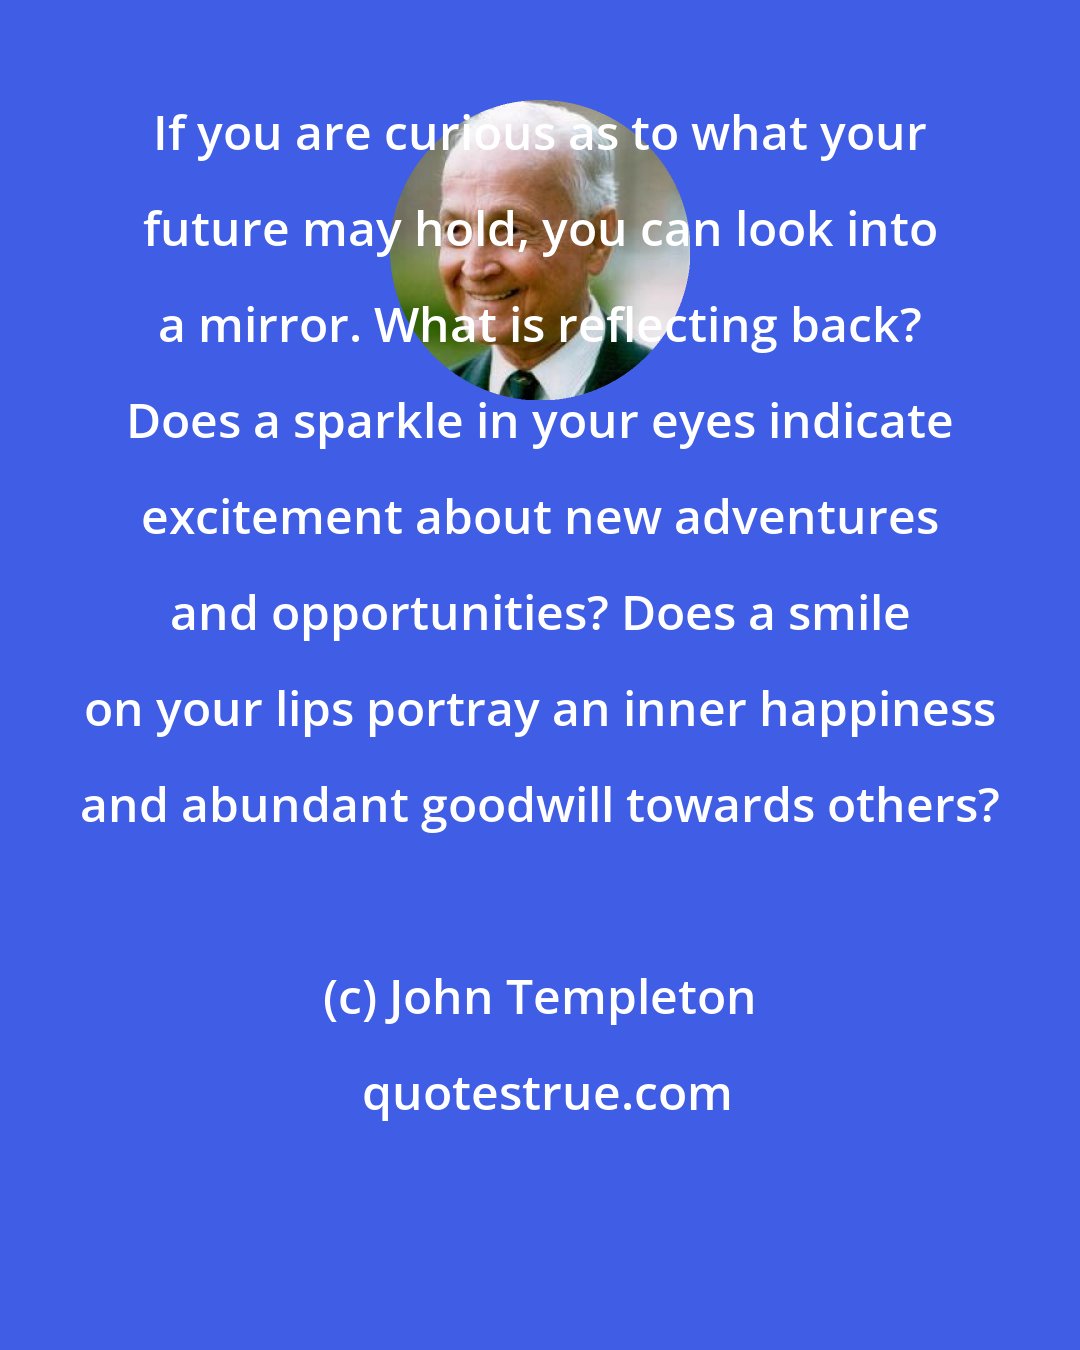 John Templeton: If you are curious as to what your future may hold, you can look into a mirror. What is reflecting back? Does a sparkle in your eyes indicate excitement about new adventures and opportunities? Does a smile on your lips portray an inner happiness and abundant goodwill towards others?